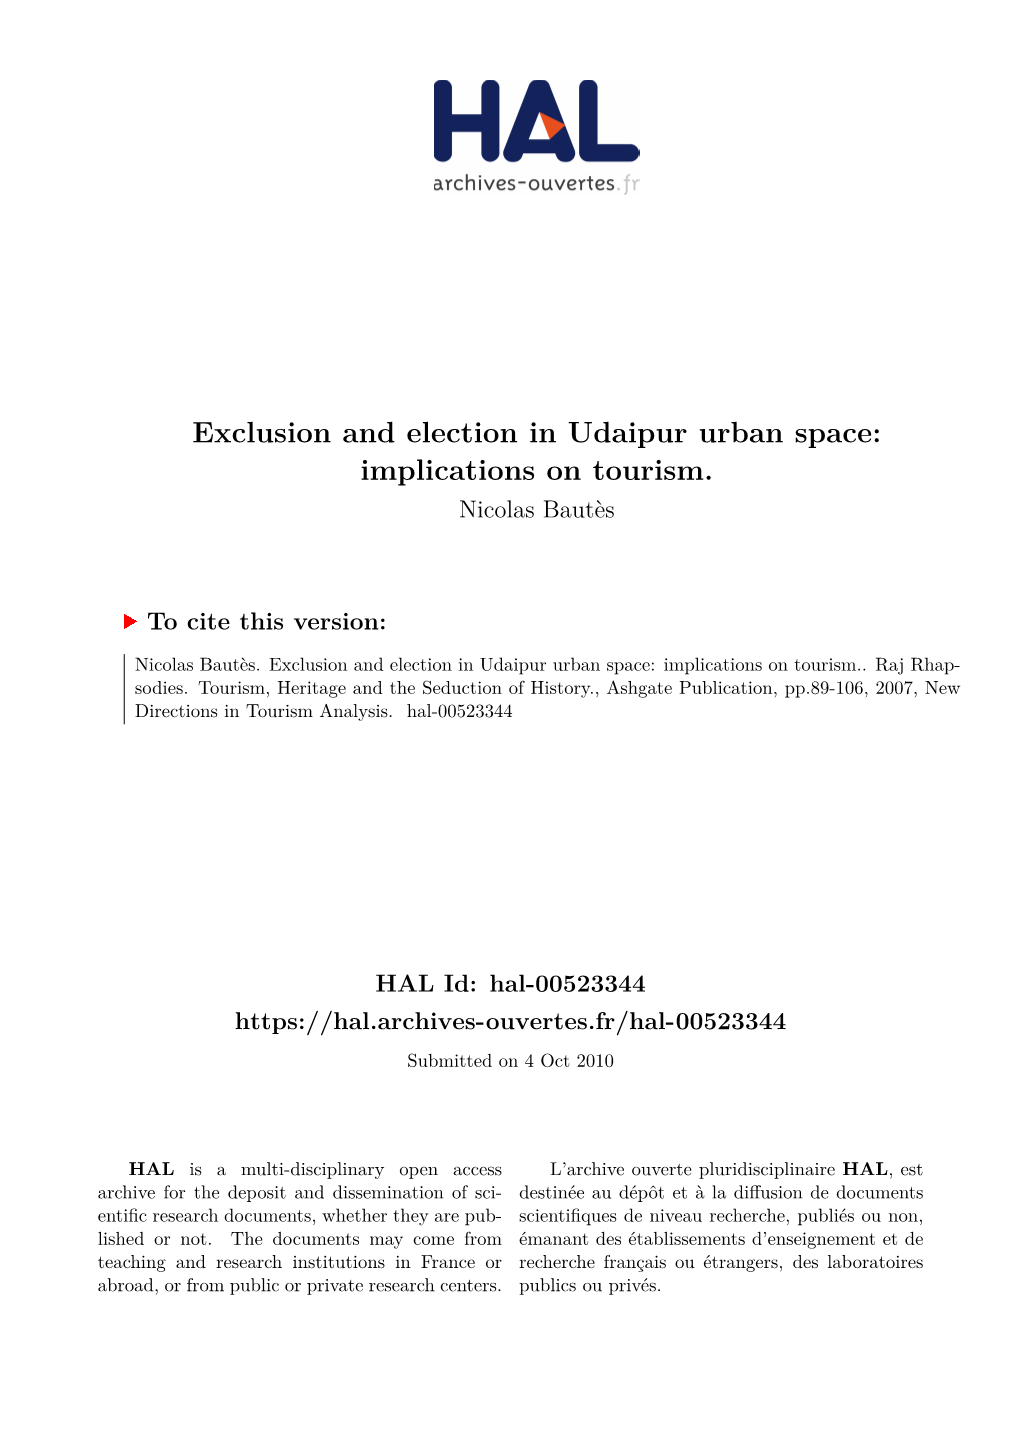 Exclusion and Election in Udaipur Urban Space: Implications on Tourism. Nicolas Bautès